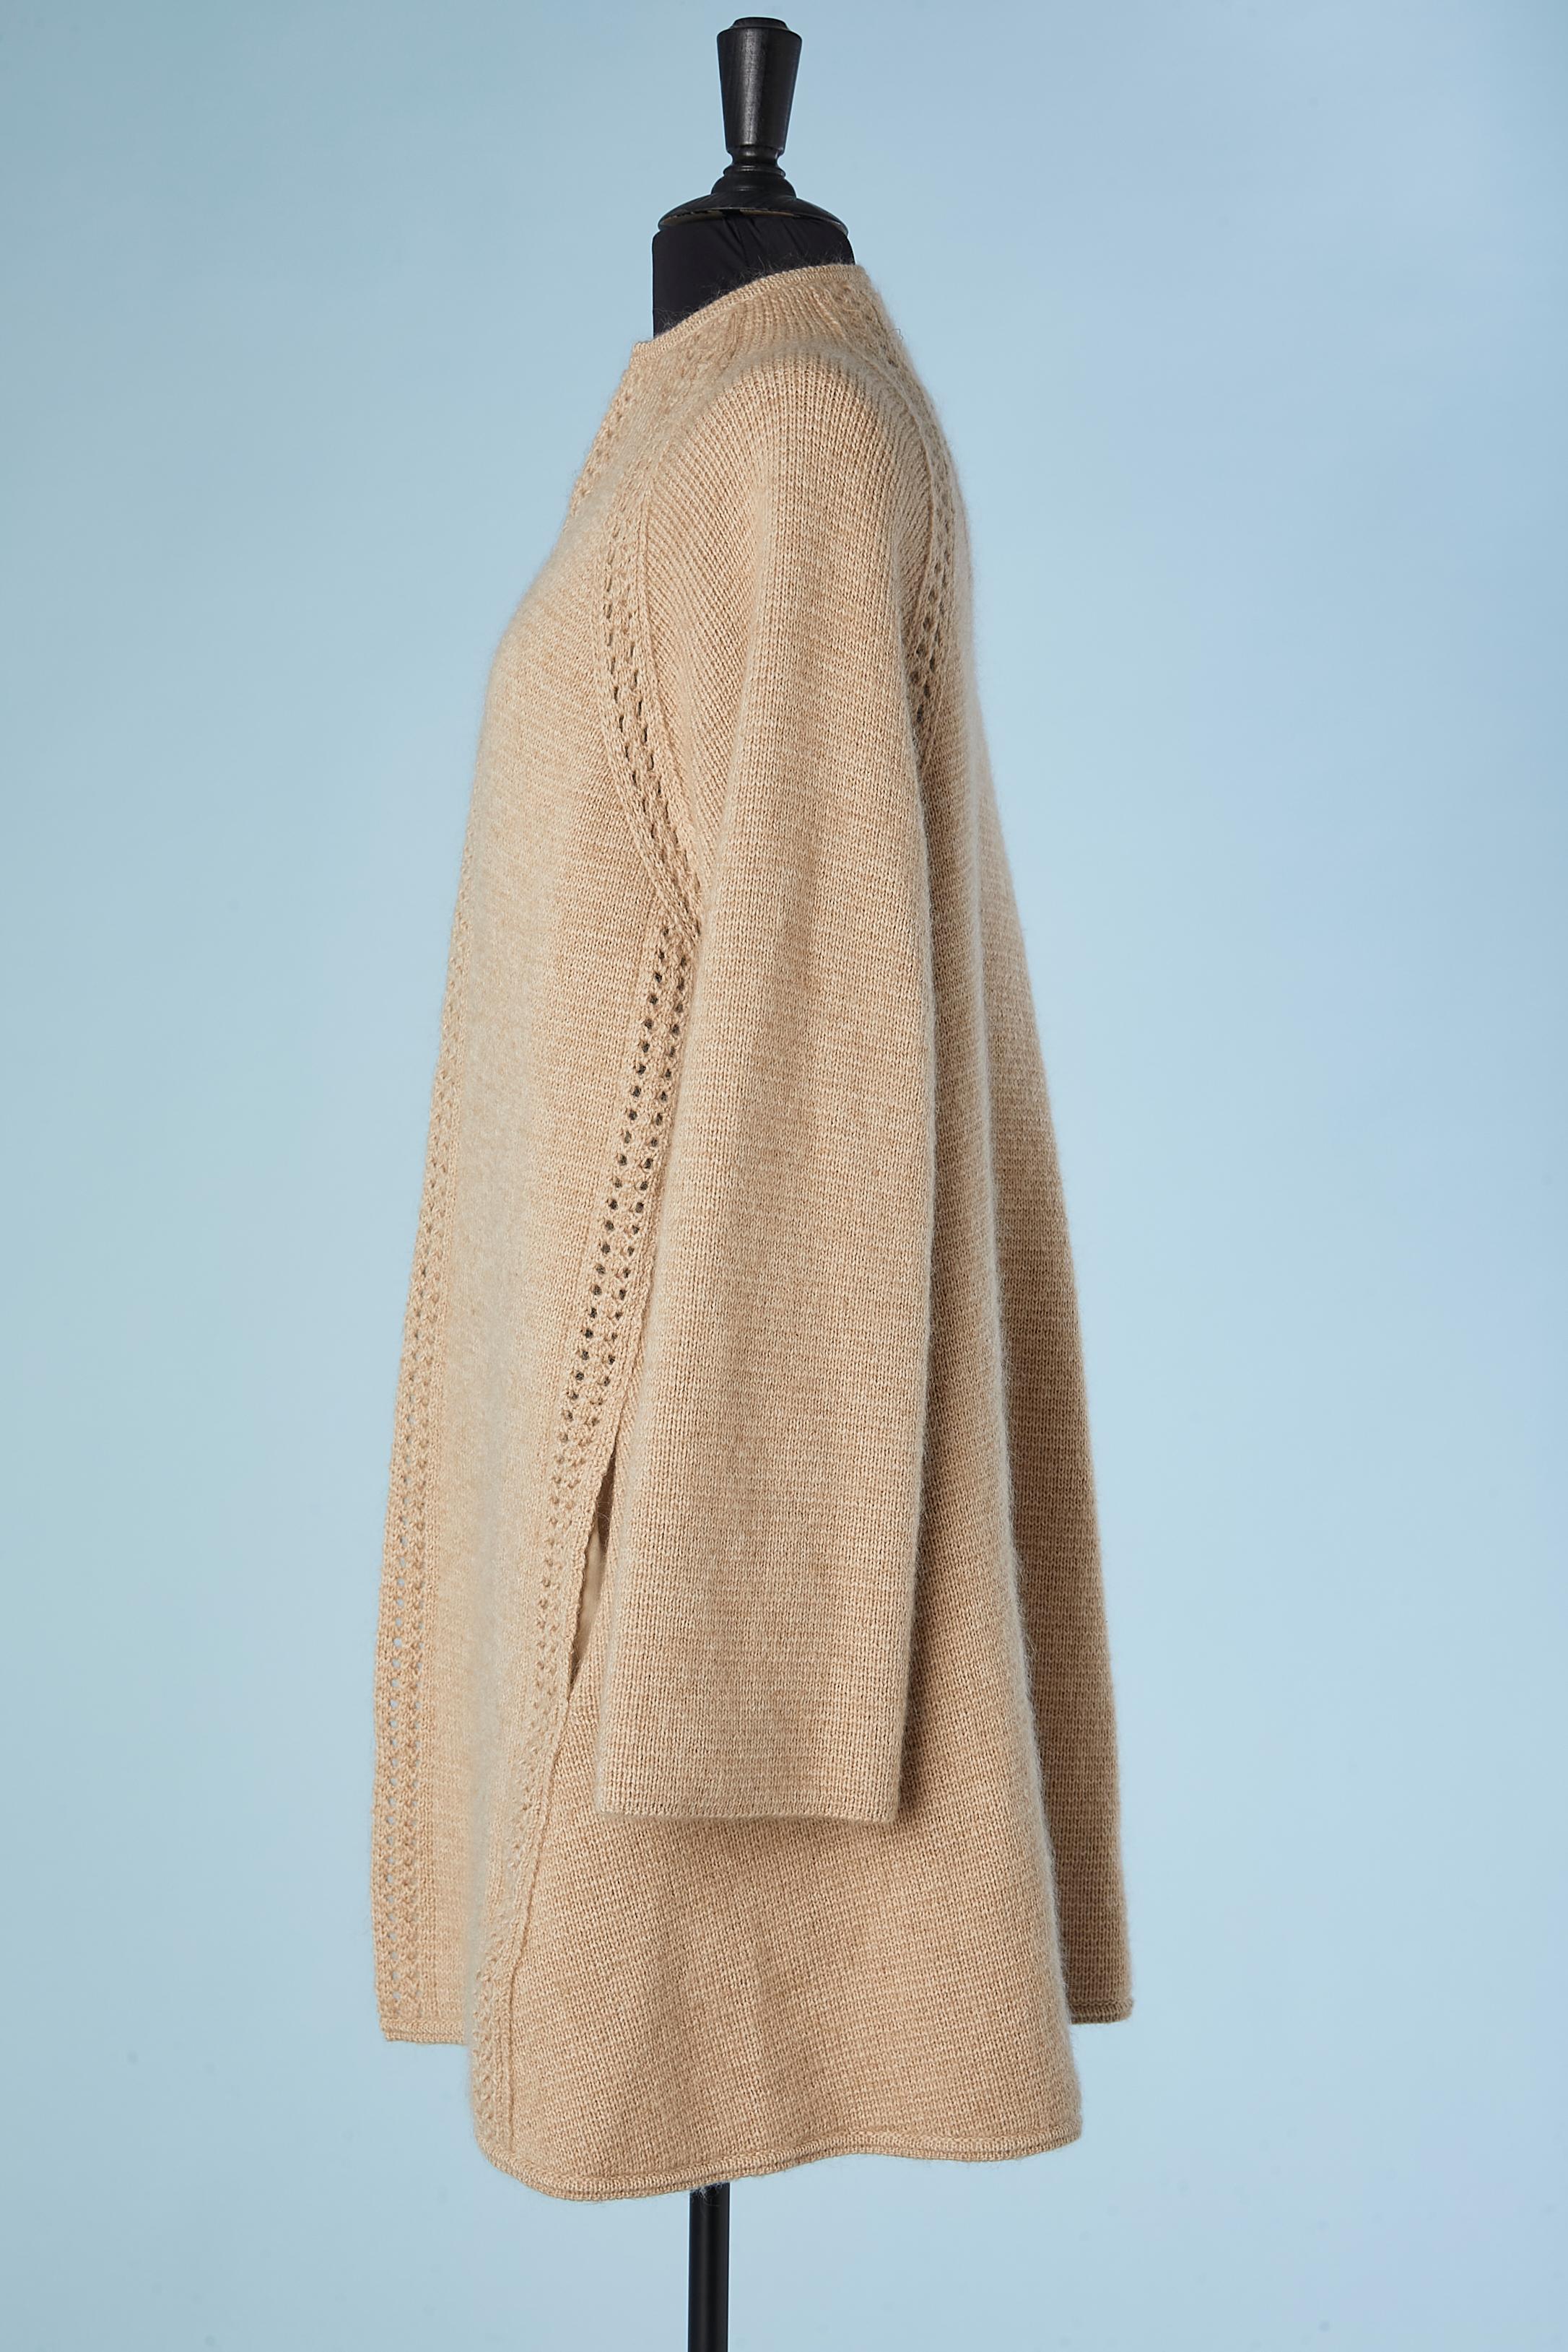 Wool and mohair long edge to edge cardigan Gianfranco Ferré  In Excellent Condition For Sale In Saint-Ouen-Sur-Seine, FR